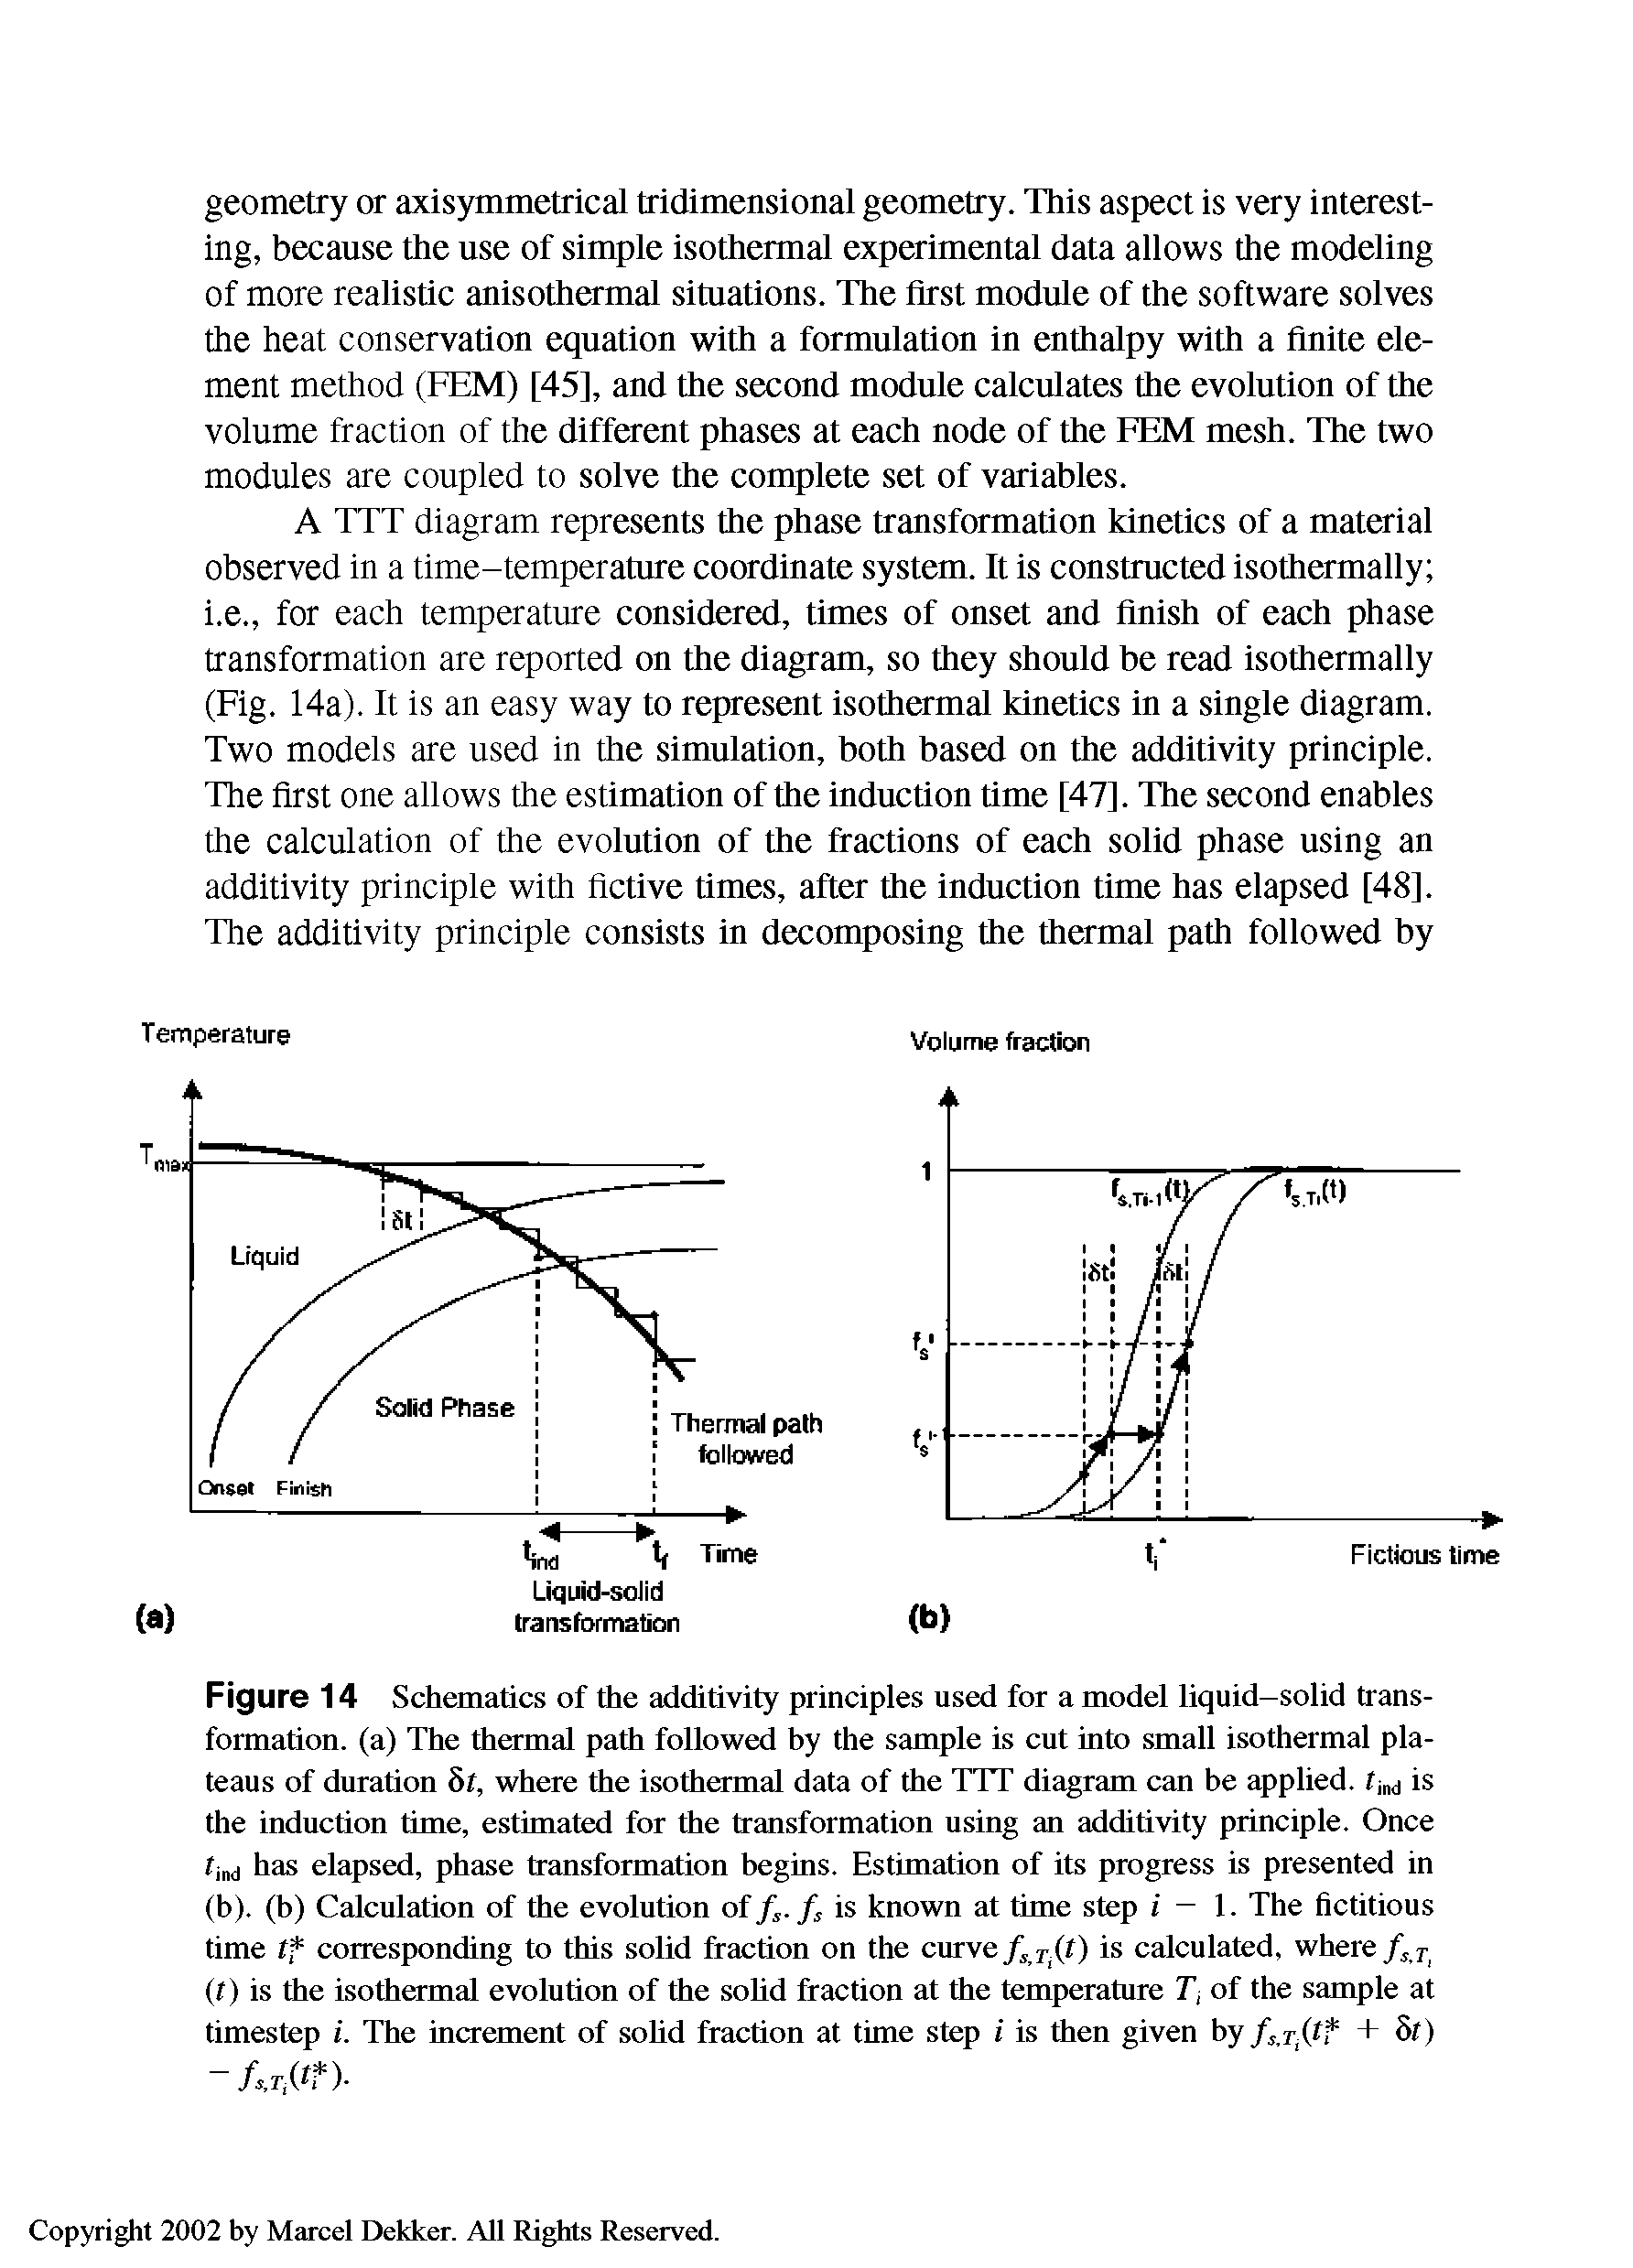 Figure 14 Schematics of the additivity principles used for a model liquid-solid transformation. (a) The thermal path followed hy the sample is cut into small isothermal plateaus of duration 5f, where the isothermal data of the TTT diagram can be applied. ti d is the induction time, estimated for the transformation using an additivity principle. Once find has elapsed, phase transformation begins. EstimaAon of its progress is presented in (b). (b) Calculation of the evolution offs-fs is known at time step i - 1. The fictitious time tf corresponding to this solid fracAon on the curveis calculated, where /,7 (t) is the isothermal evolution of the solid fraction at the temperature T, of the sample at timestep i. The increment of sohd fracAon at time step i is then given by fs.Ti(f + 0 -fs.T,(tn...